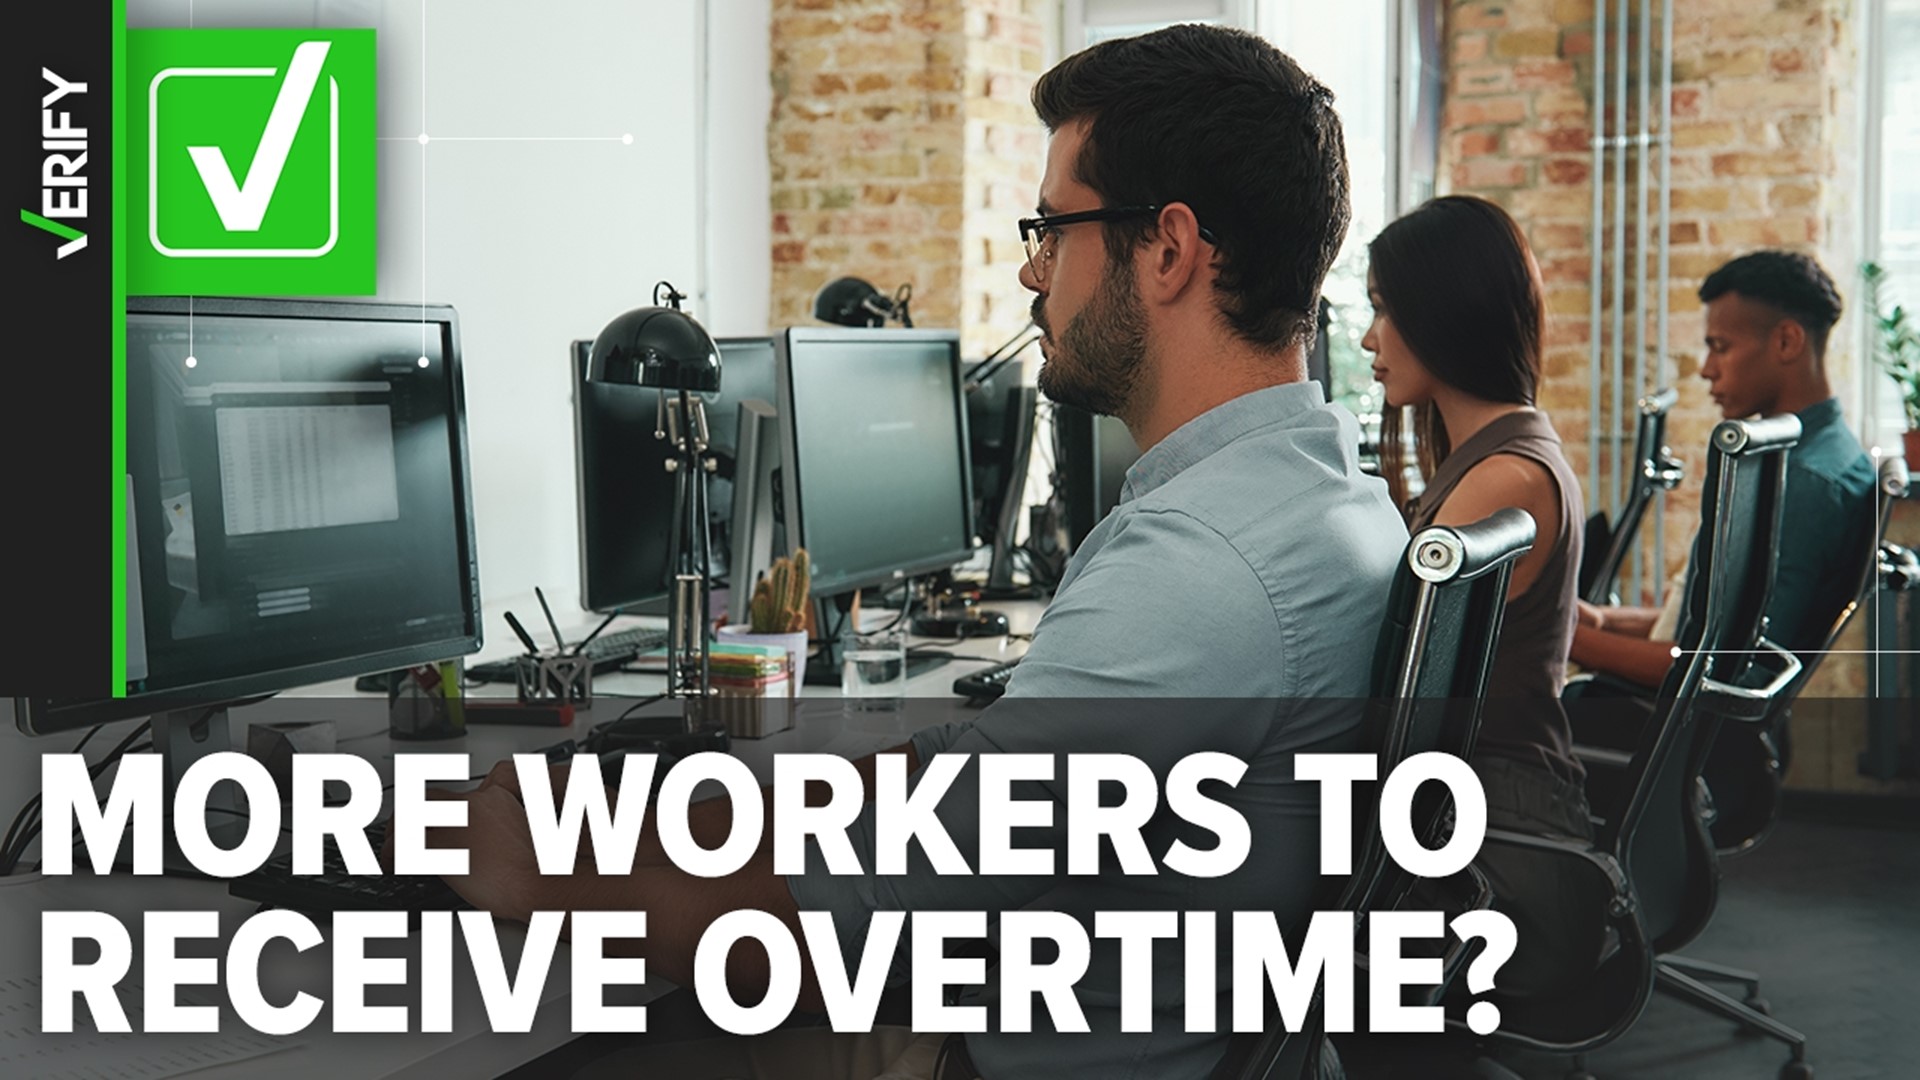 Most workers making less than $55k would be guaranteed time-and-a-half pay for overtime hours.